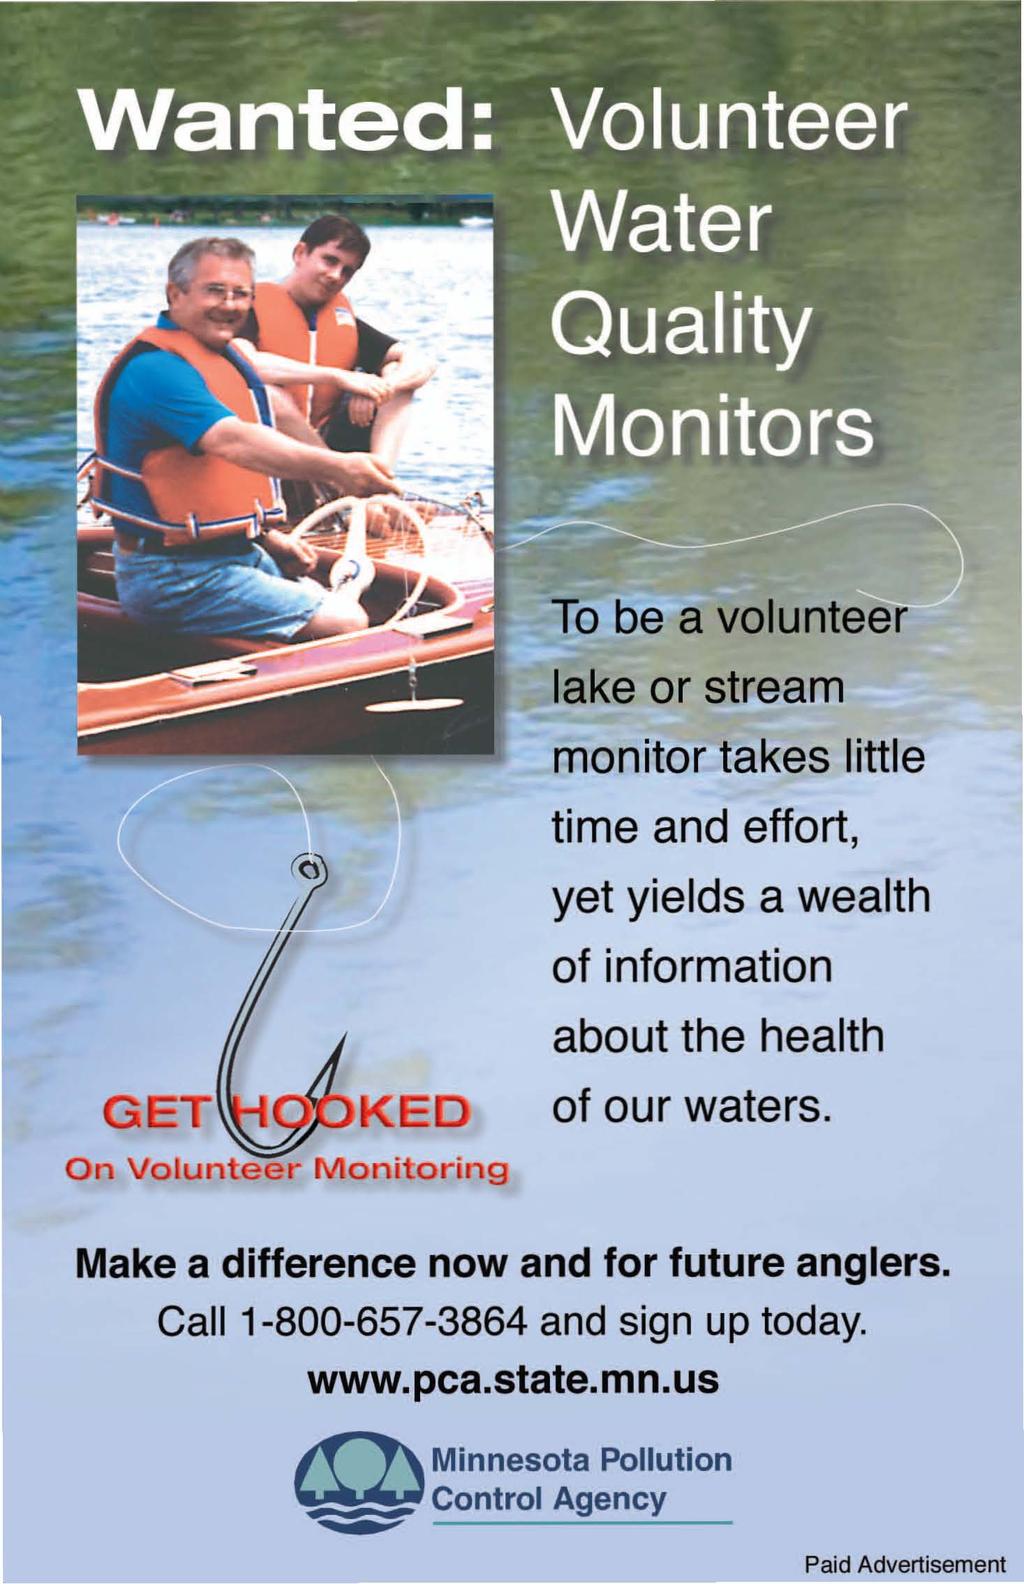 To be a volunteer lake or stream monitor takes little time and effort, yet yields a wealth of information about the health of our waters.